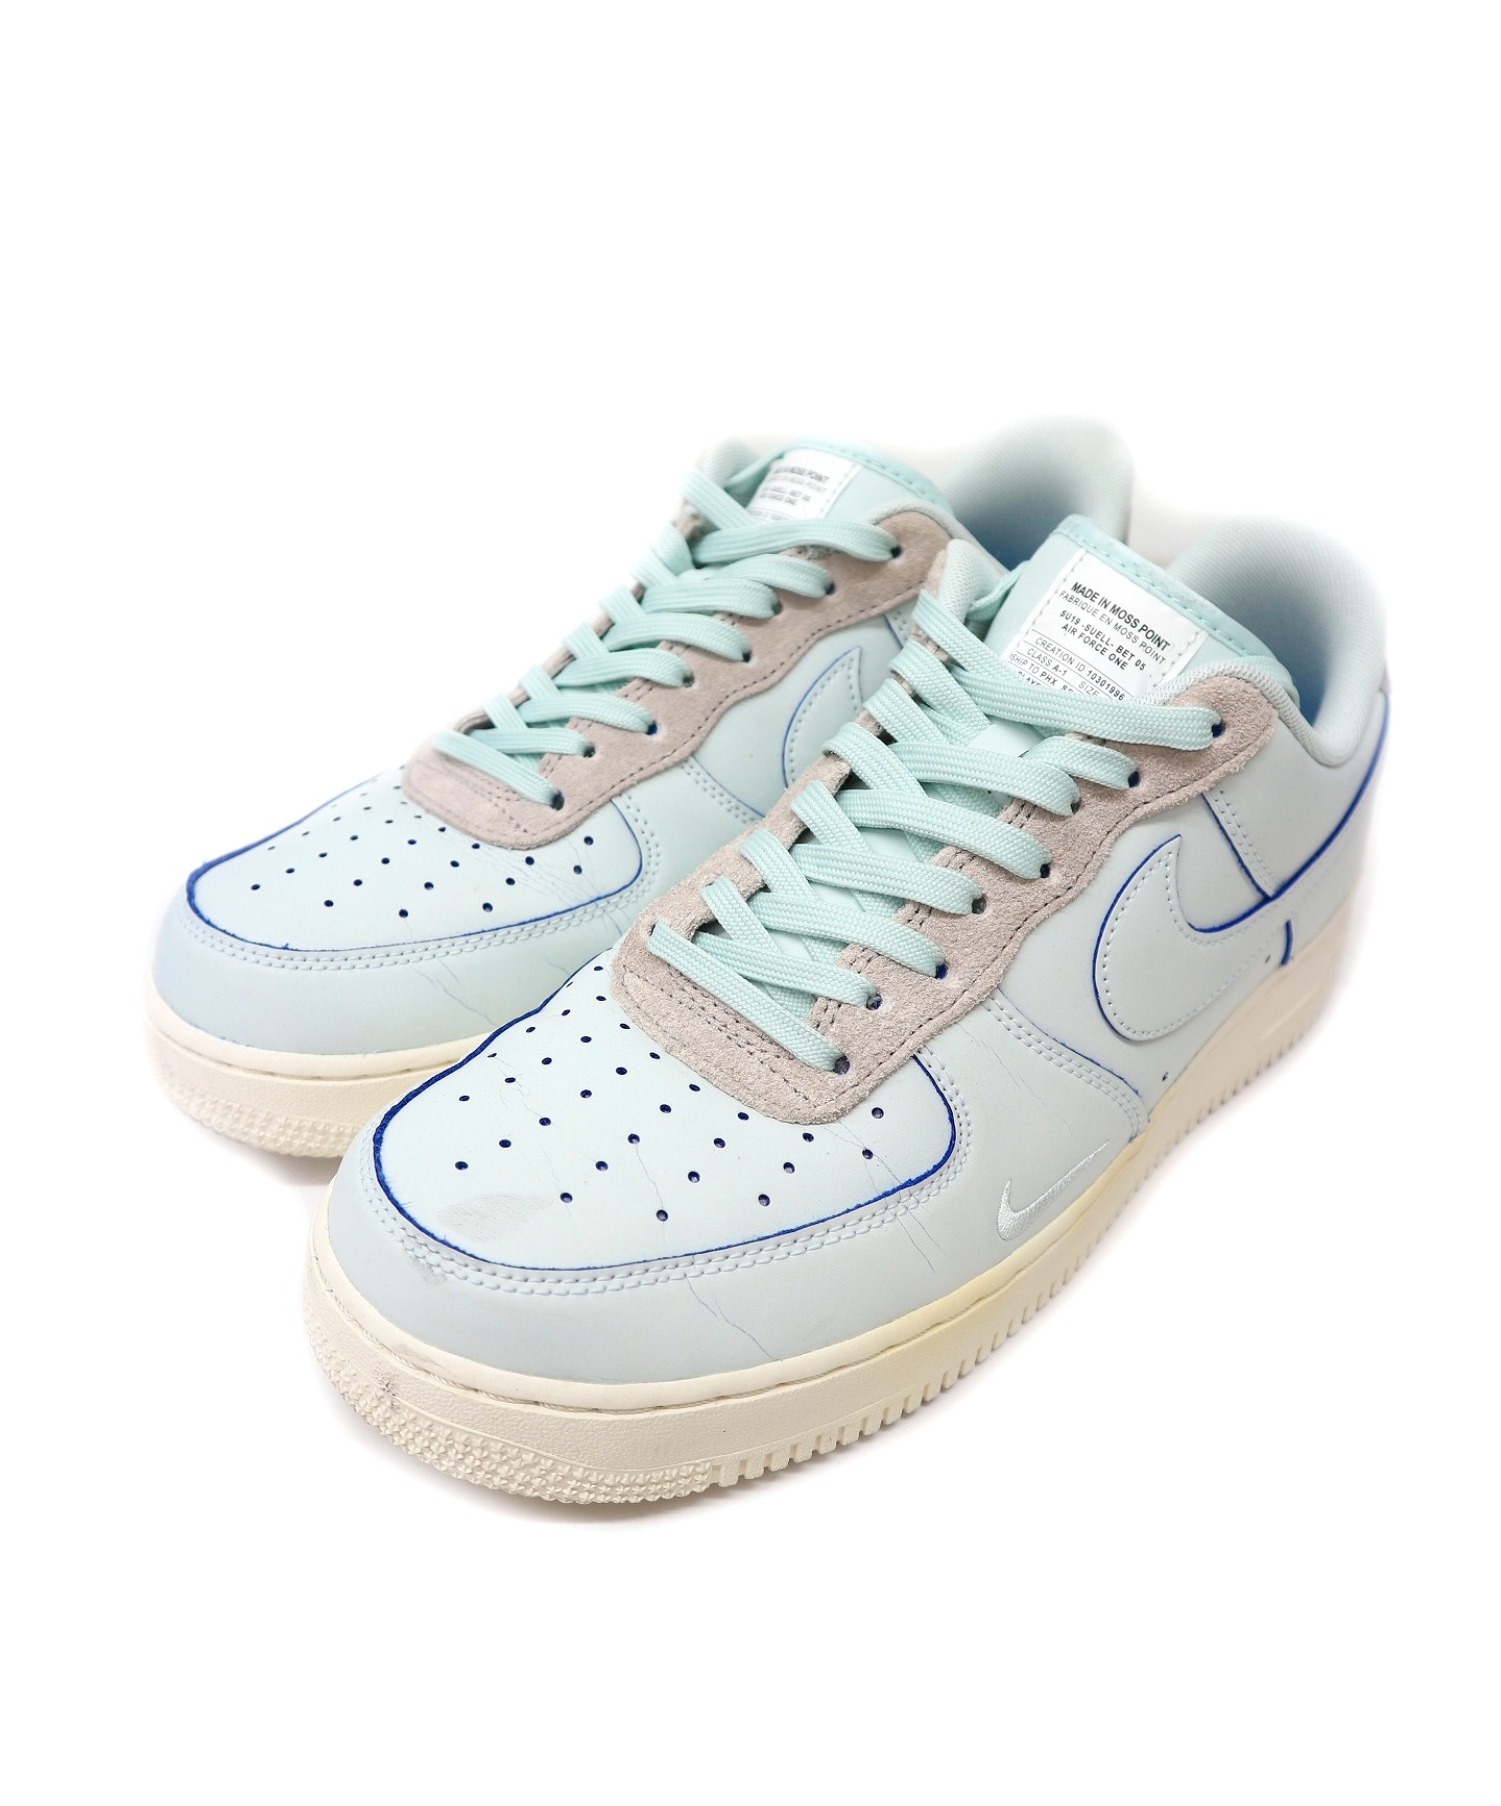 devin booker air force 1